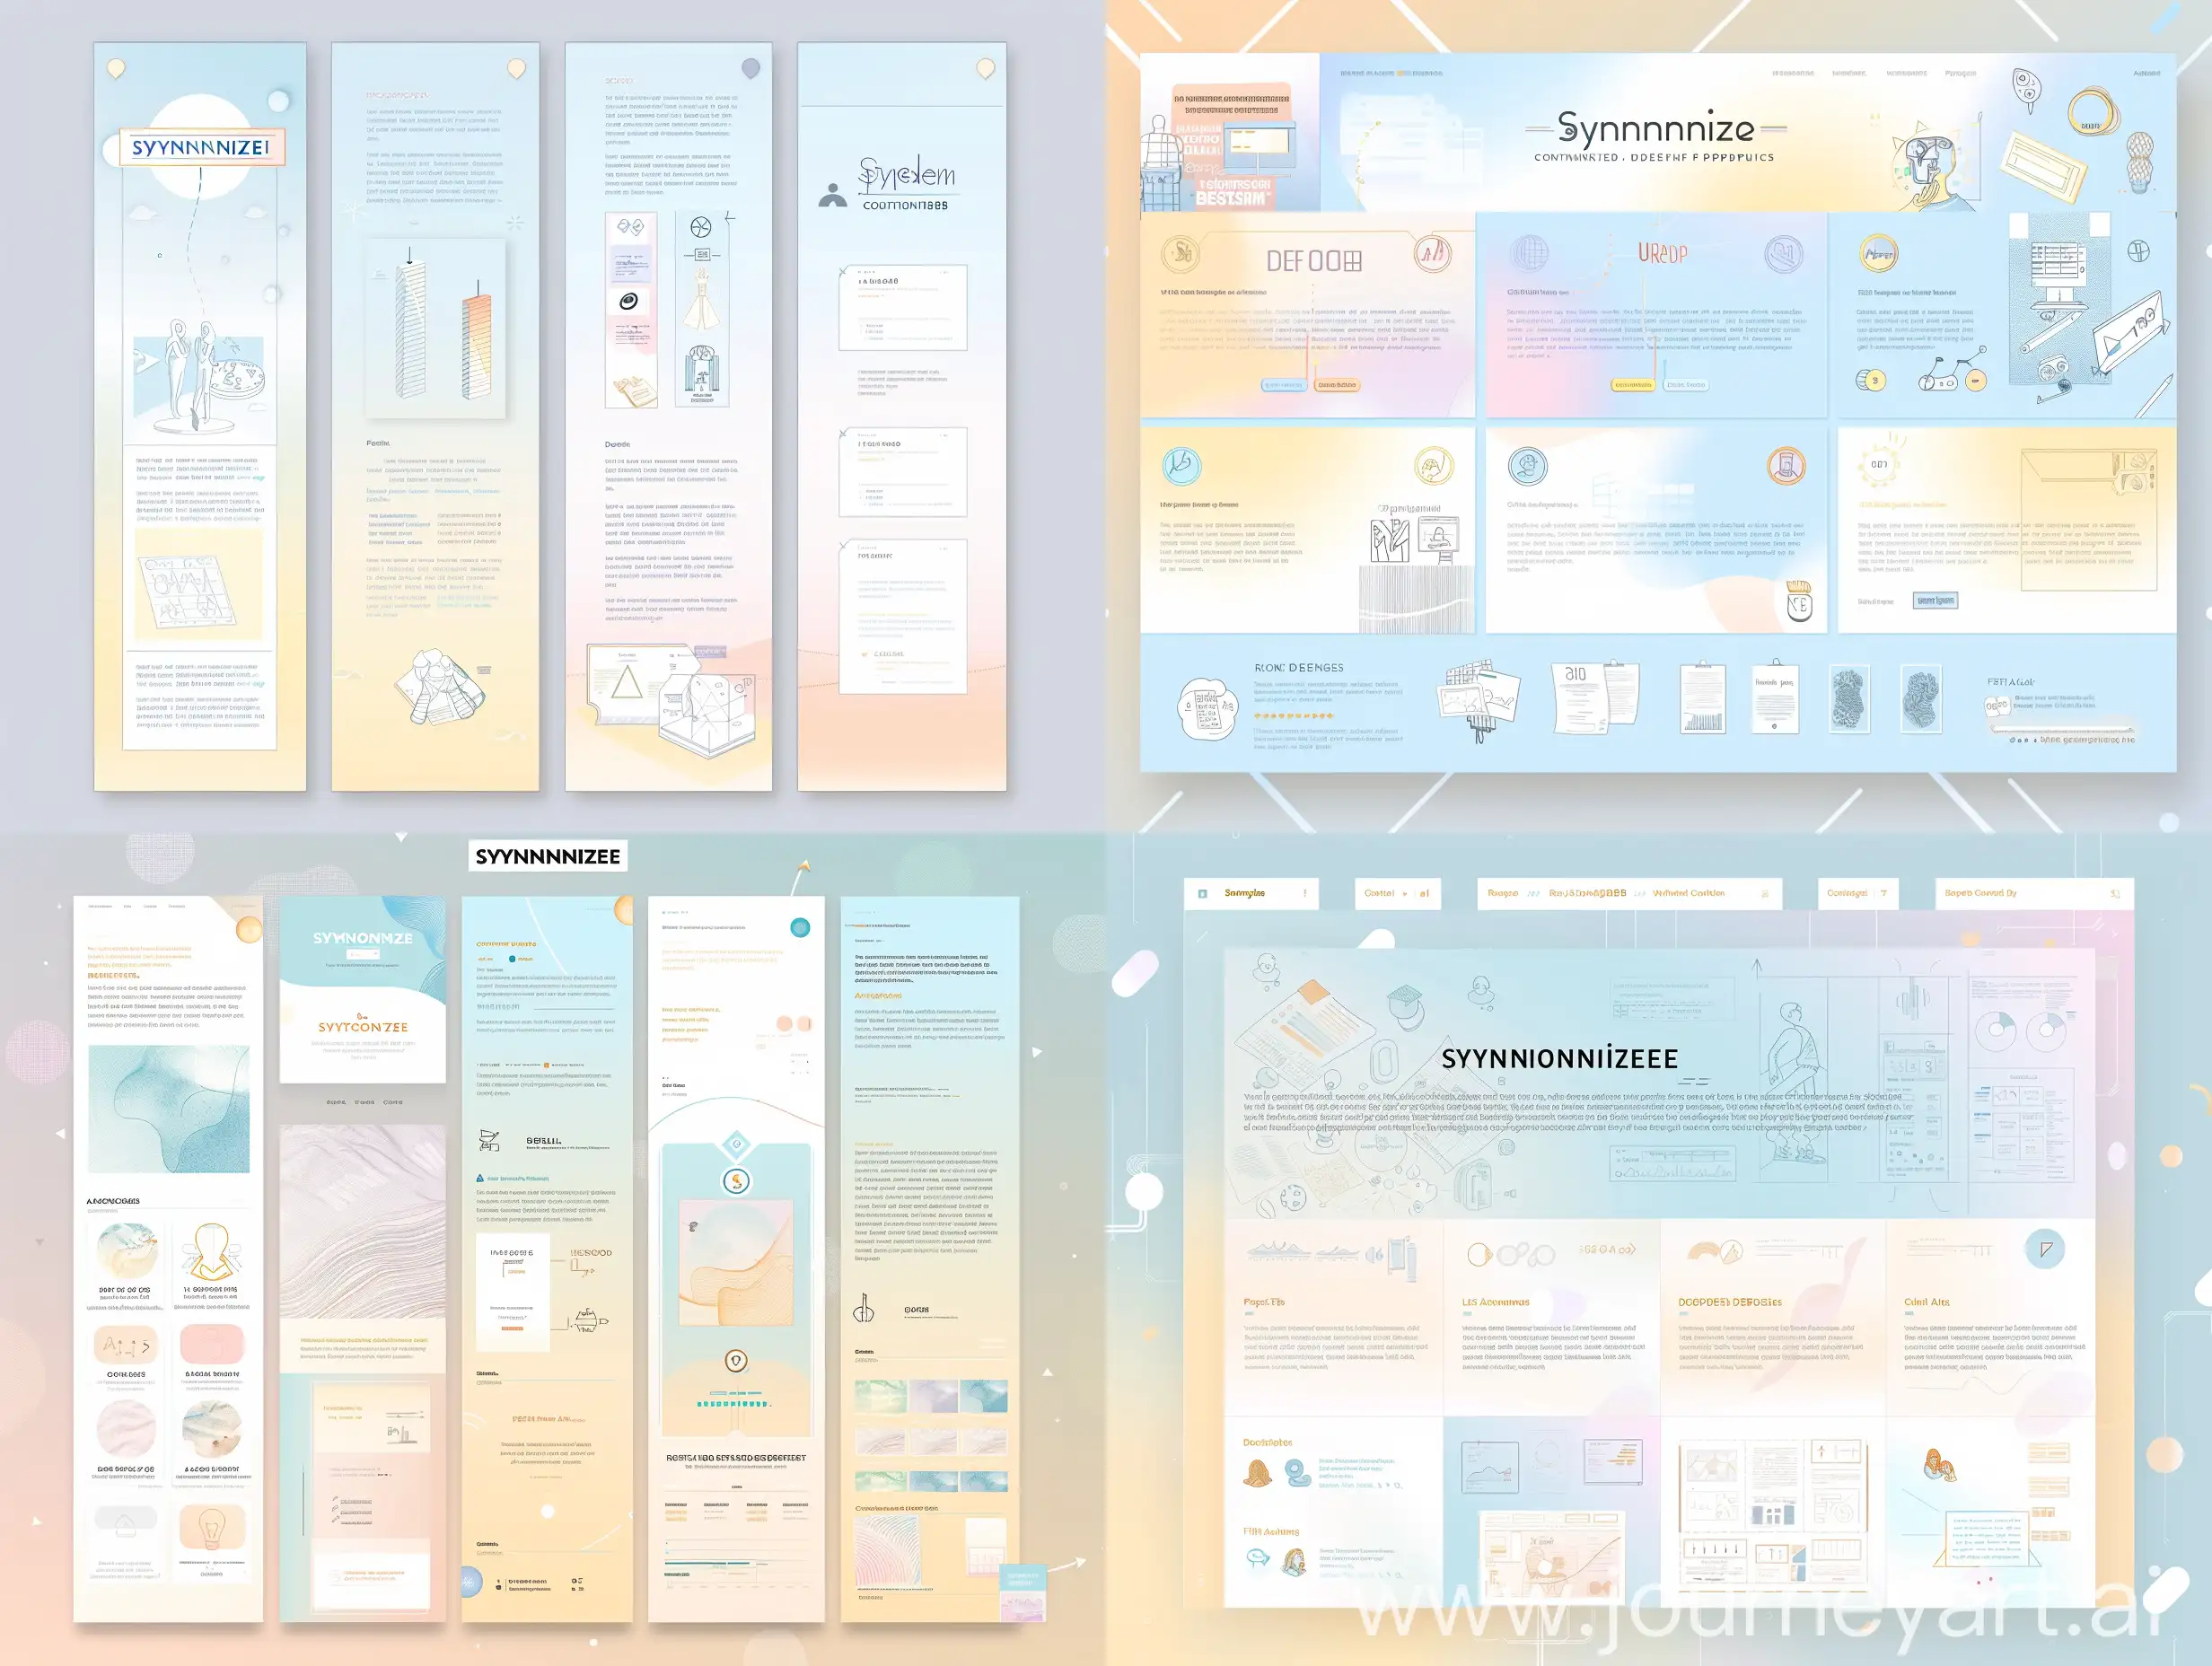 "Design a long-scroll Behance post template for 'Synkronize,' featuring a soft pastel blue (#A3DAFB) and warm pastel yellow (#FFE4A1) gradient color scheme with white (#FFFFFF) accents. The template includes a header section with the project logo and title, an issue statement section with text and icons, a research findings section with infographics, a concept development section with sketches and mood boards, a design process section with step-by-step visuals, a final design section with high-quality images, and a conclusion section with a summary and call to action. Typography is bold and playful for headers, regular for body text, and italicized for captions. Icons are simple and flat, with soft pastel backgrounds. Use rounded edges for buttons and elements, with arrow indicators for navigation and gradient spots for backgrounds."